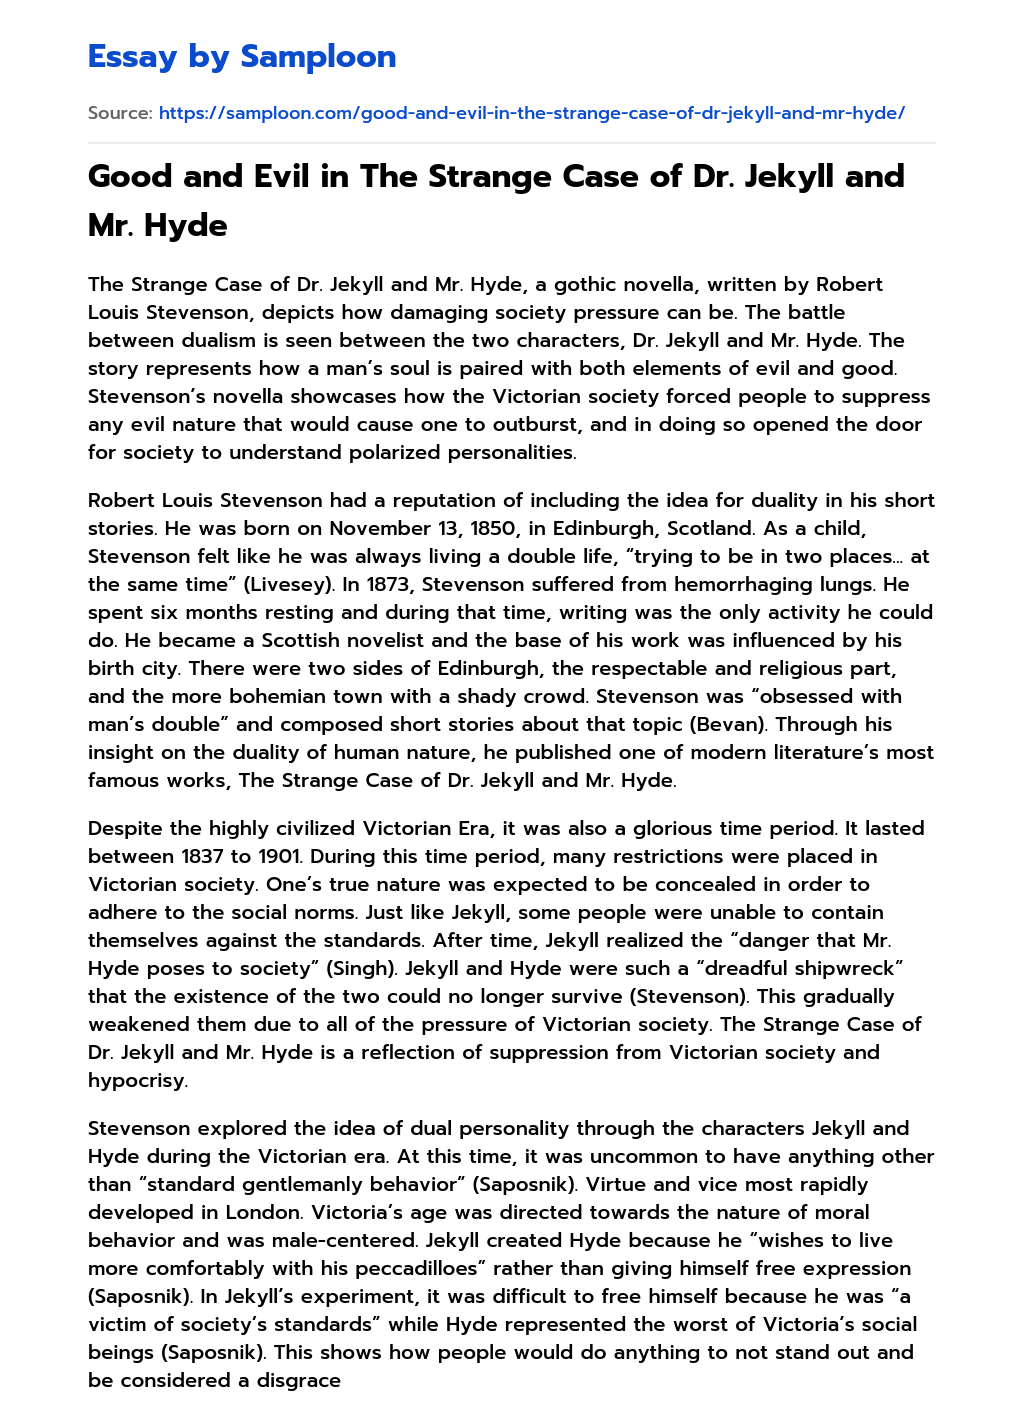 jekyll and hyde good and evil essay